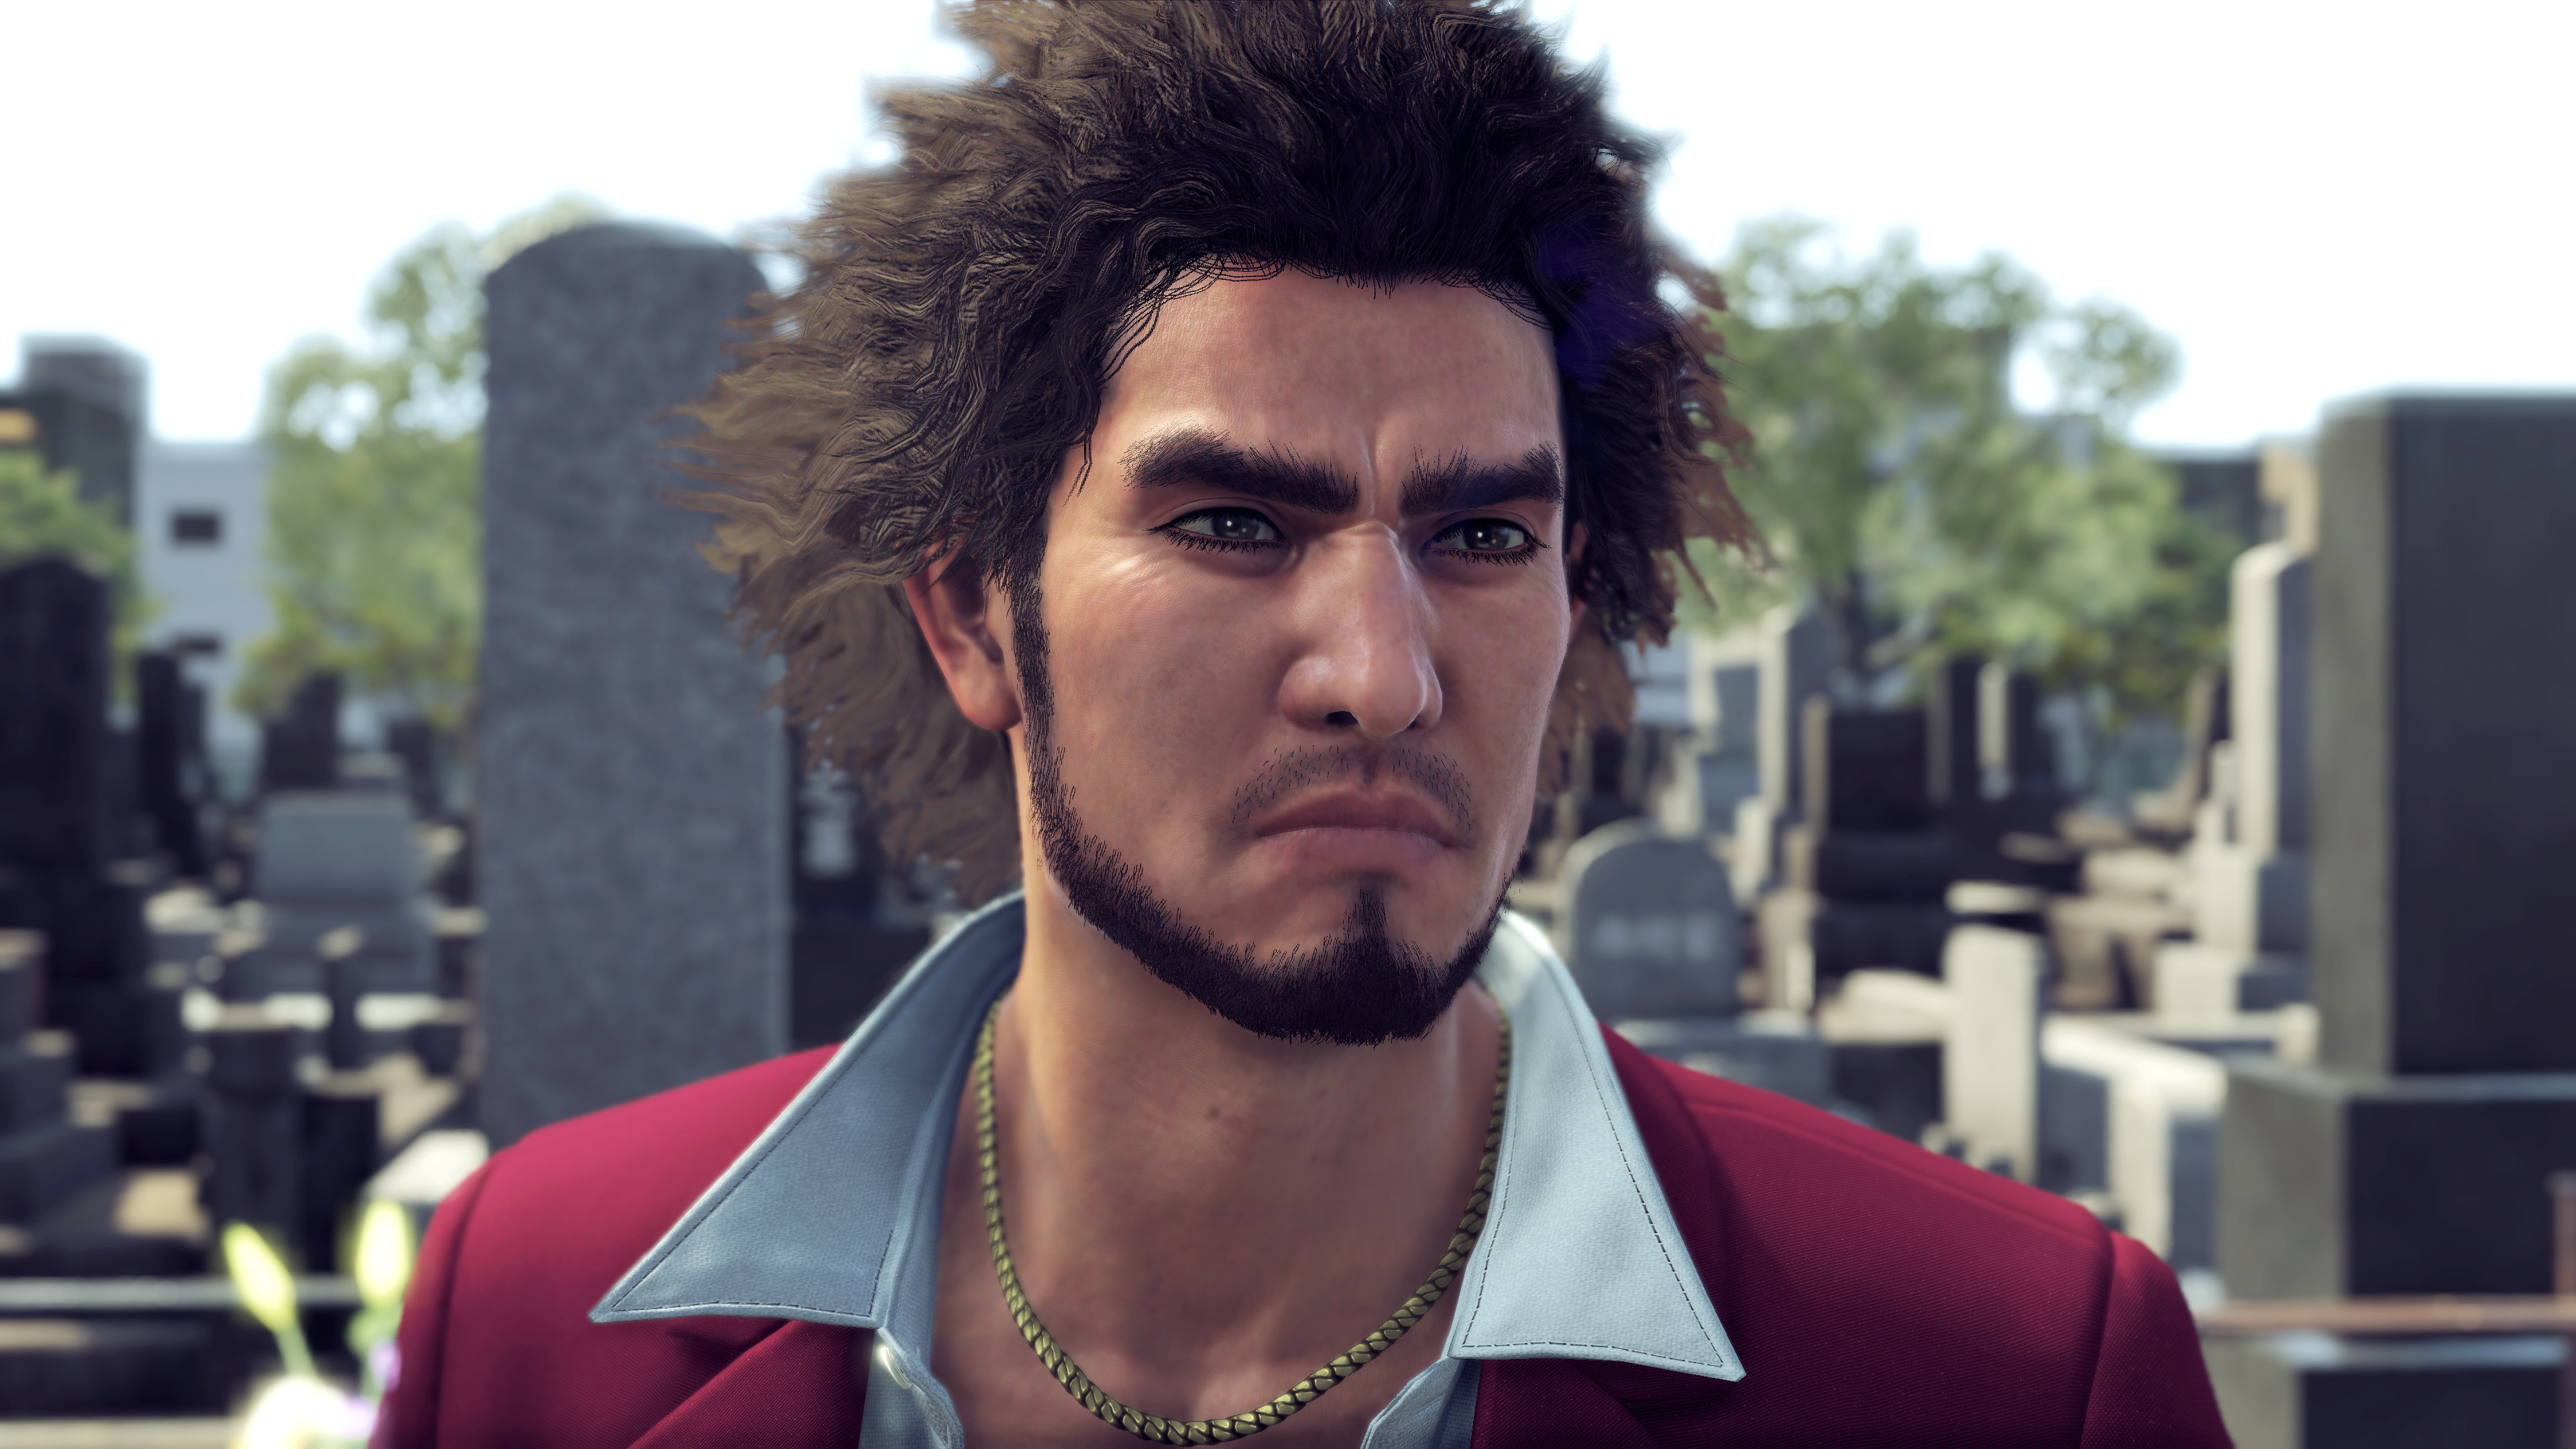 a close-up of Ichiban Kasuga, the protagonist of Yakuza: Like a Dragon, wearing a white dress shirt with a very open collar beneath a burgundy sport coat